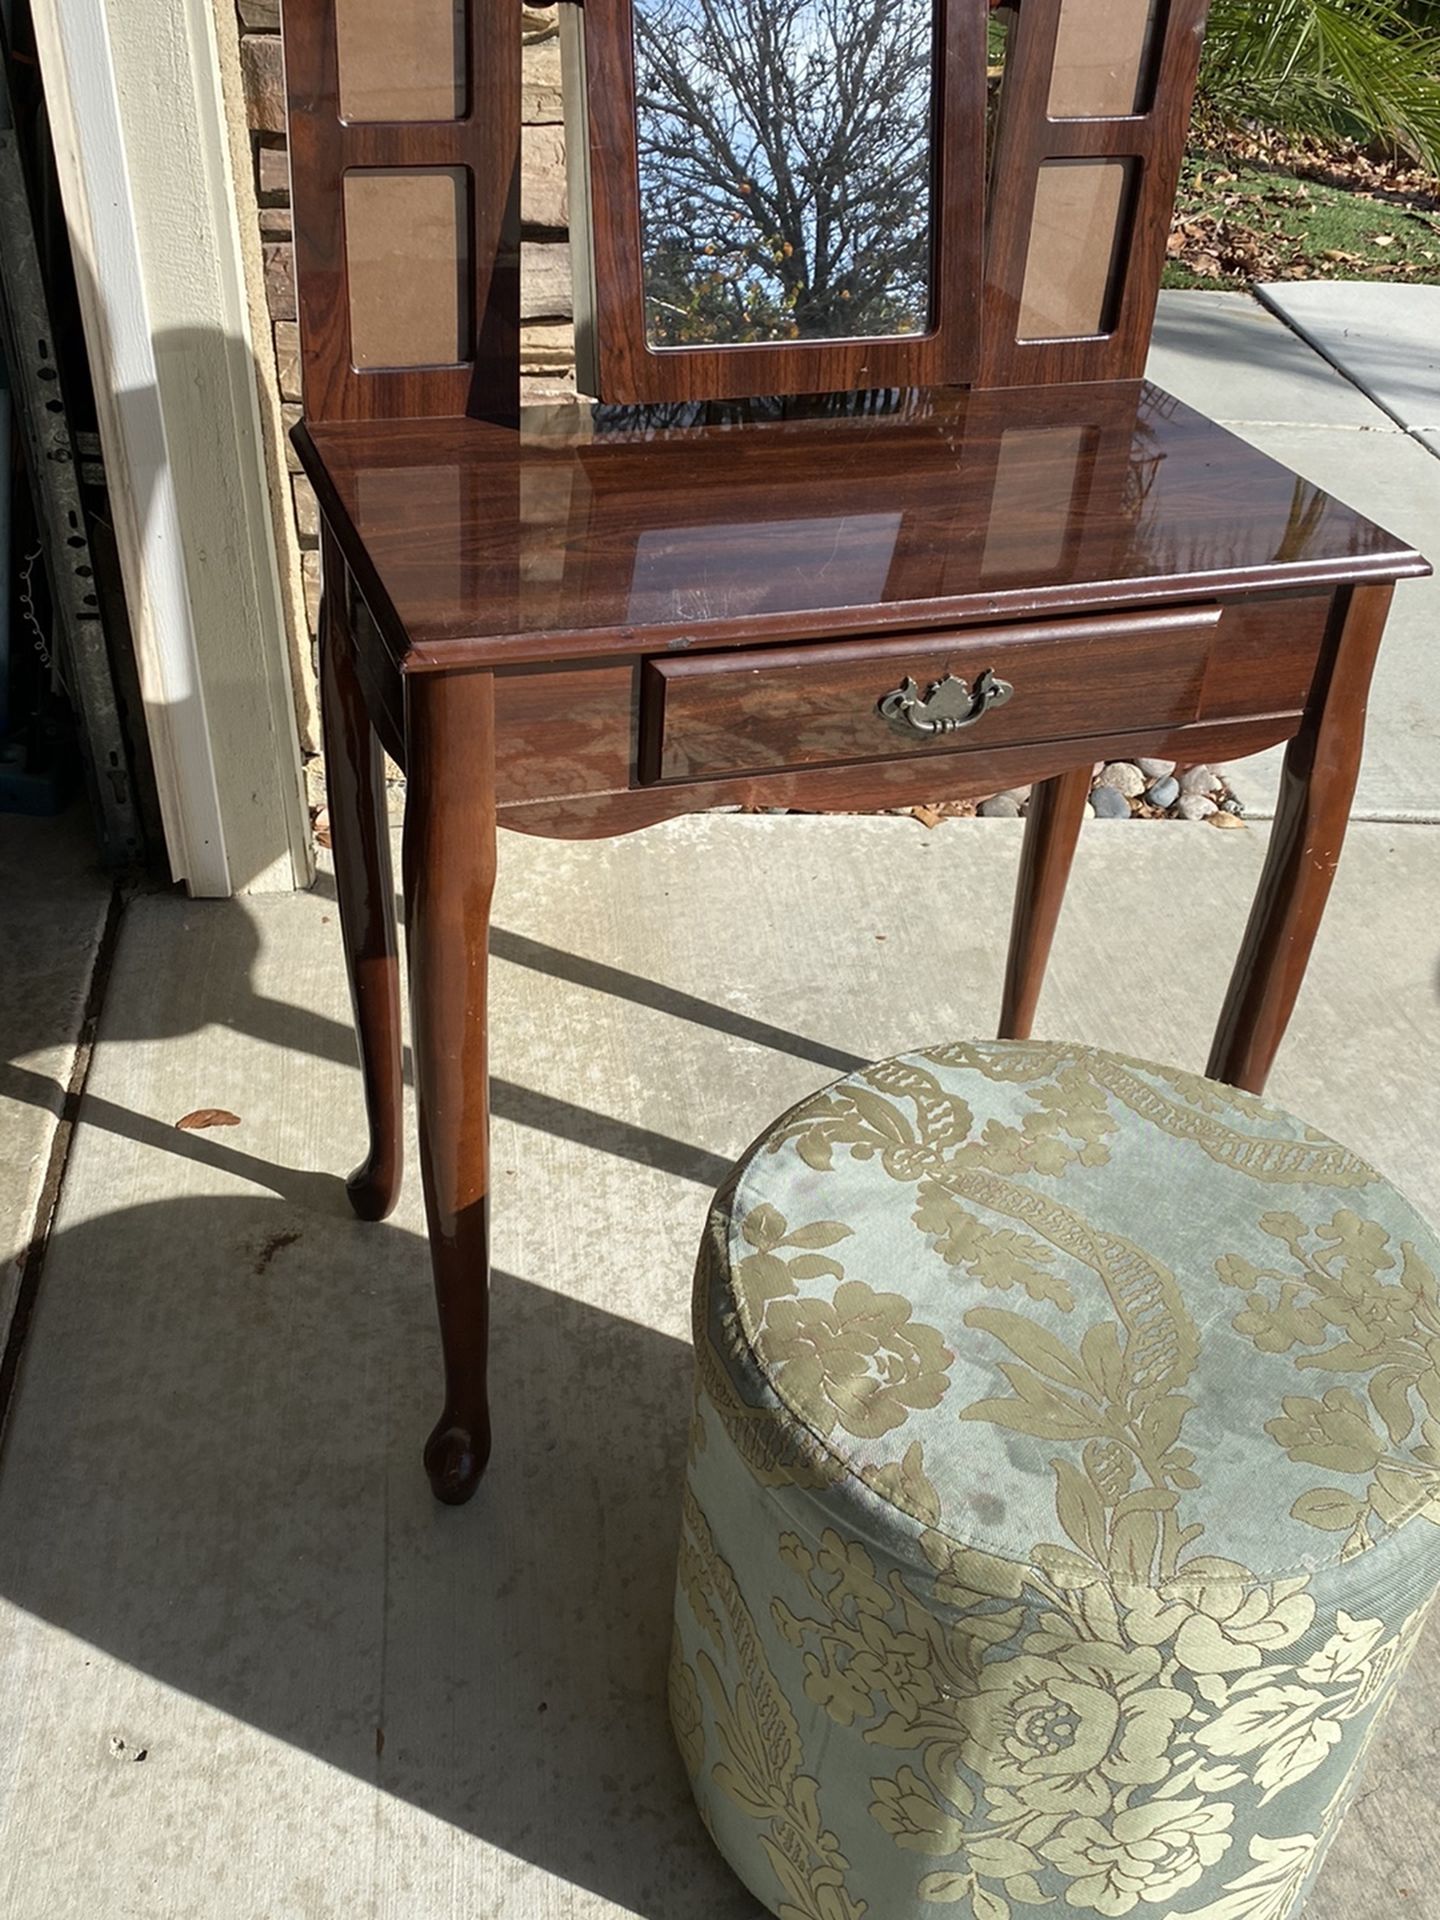 Beautiful Vanity Table With Drawer And It Has Jewelry Storage And has Frame For Pictures In Great Condition